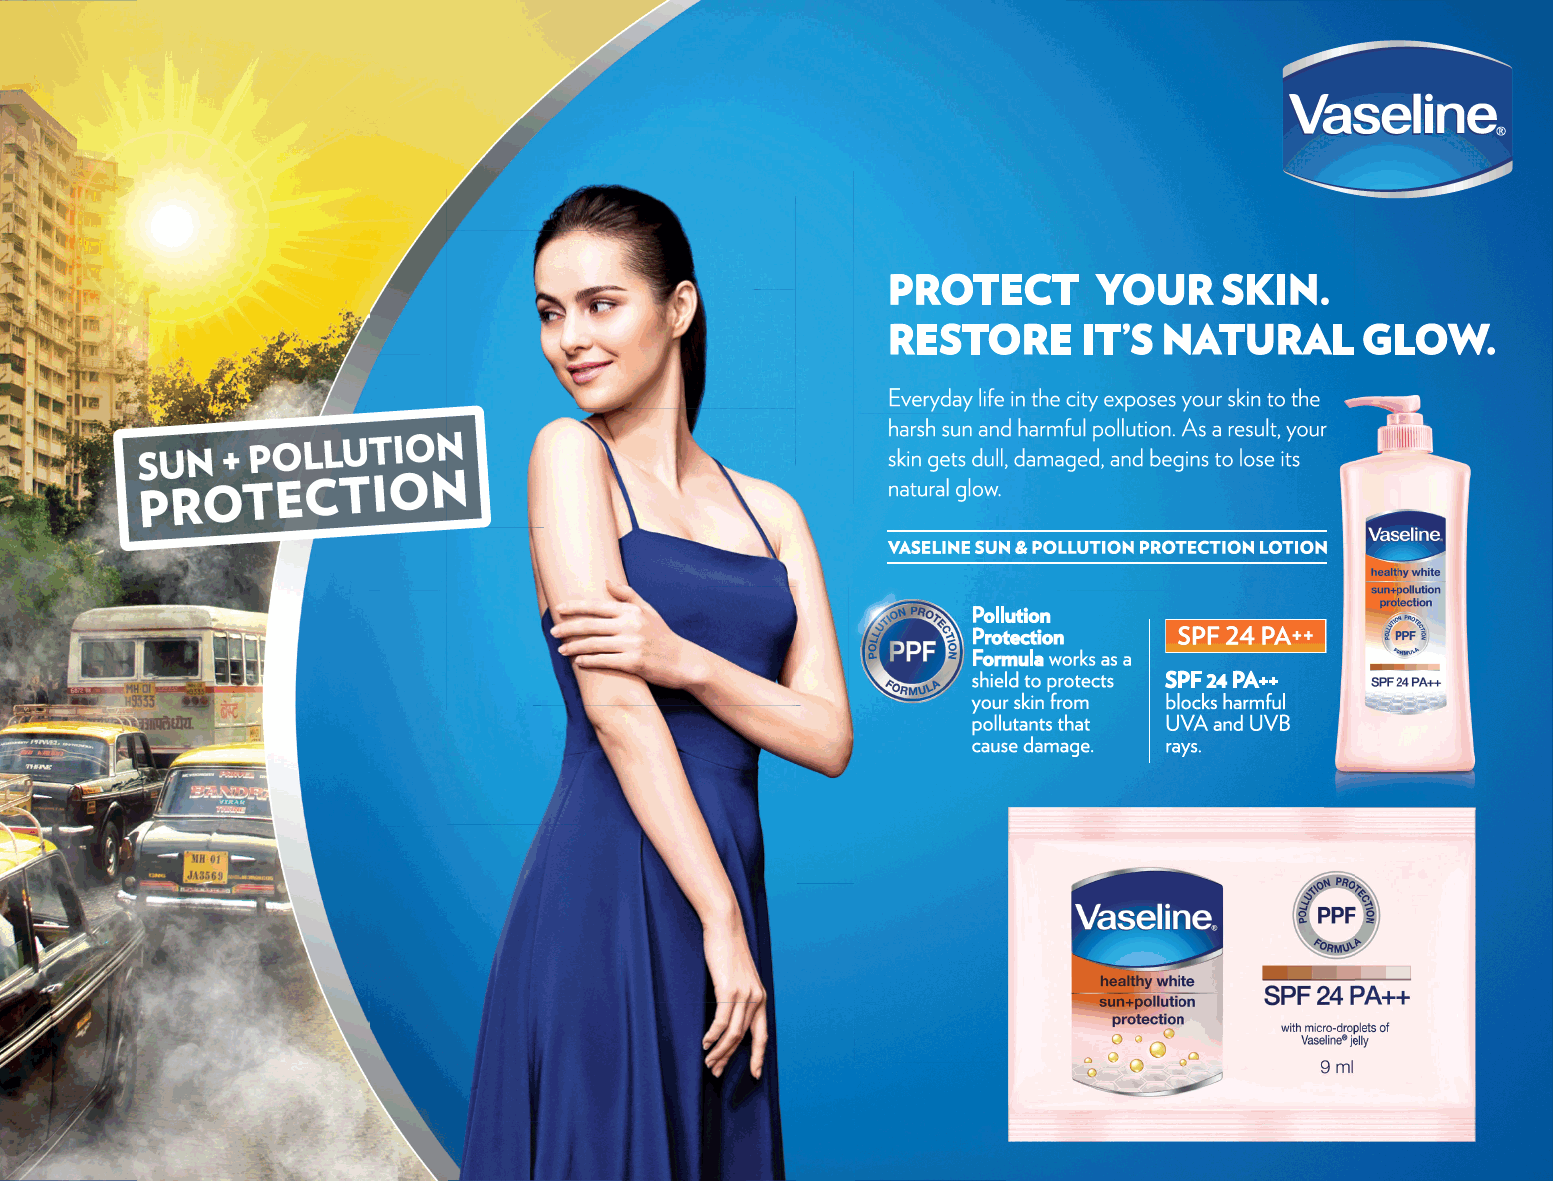 Vaseline Protect Your Skin Restore Its Natural Glow Ad Advert Gallery